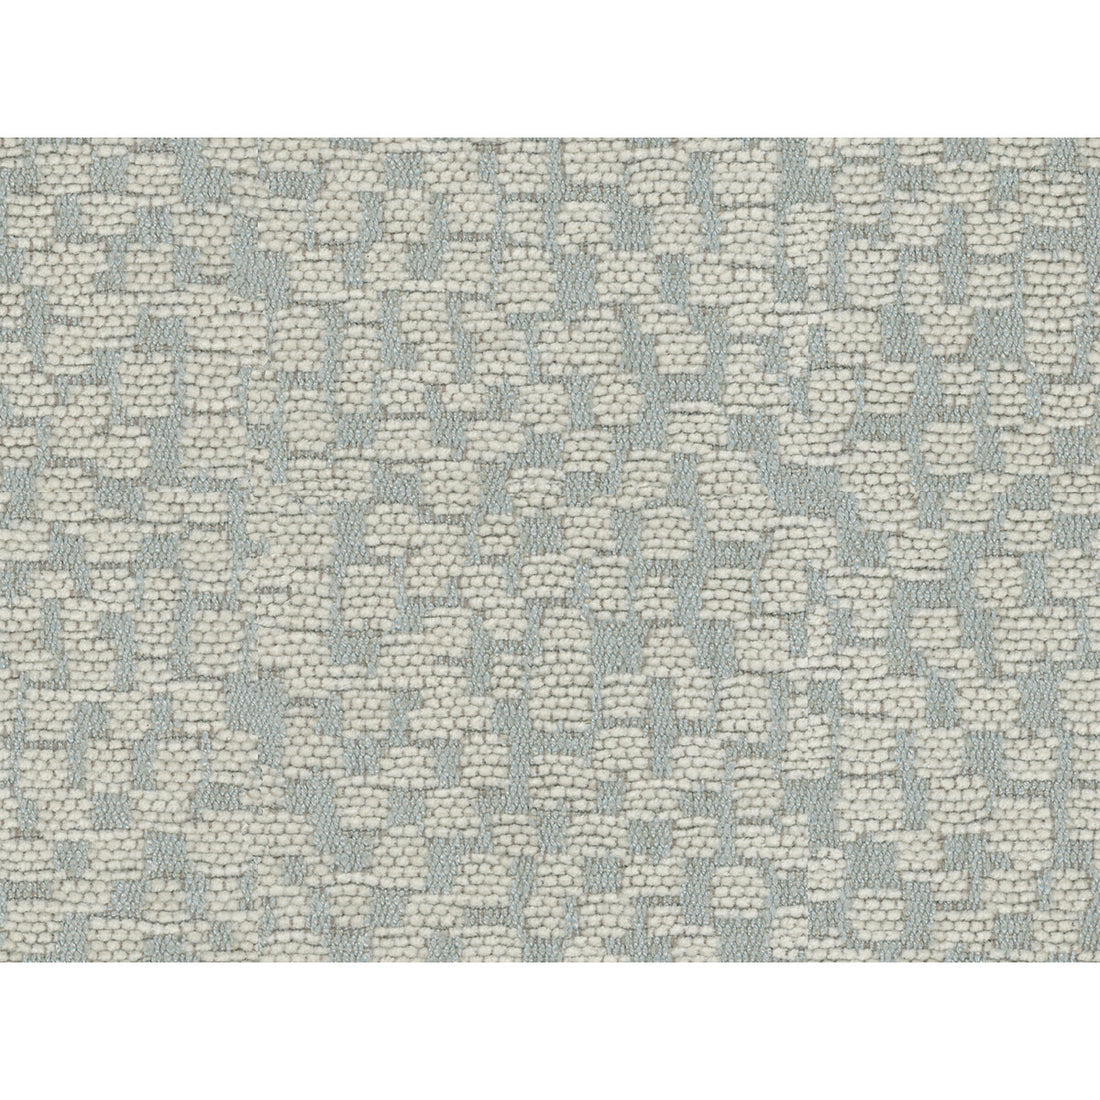 Abstract Form fabric in glacier color - pattern 34401.15.0 - by Kravet Couture